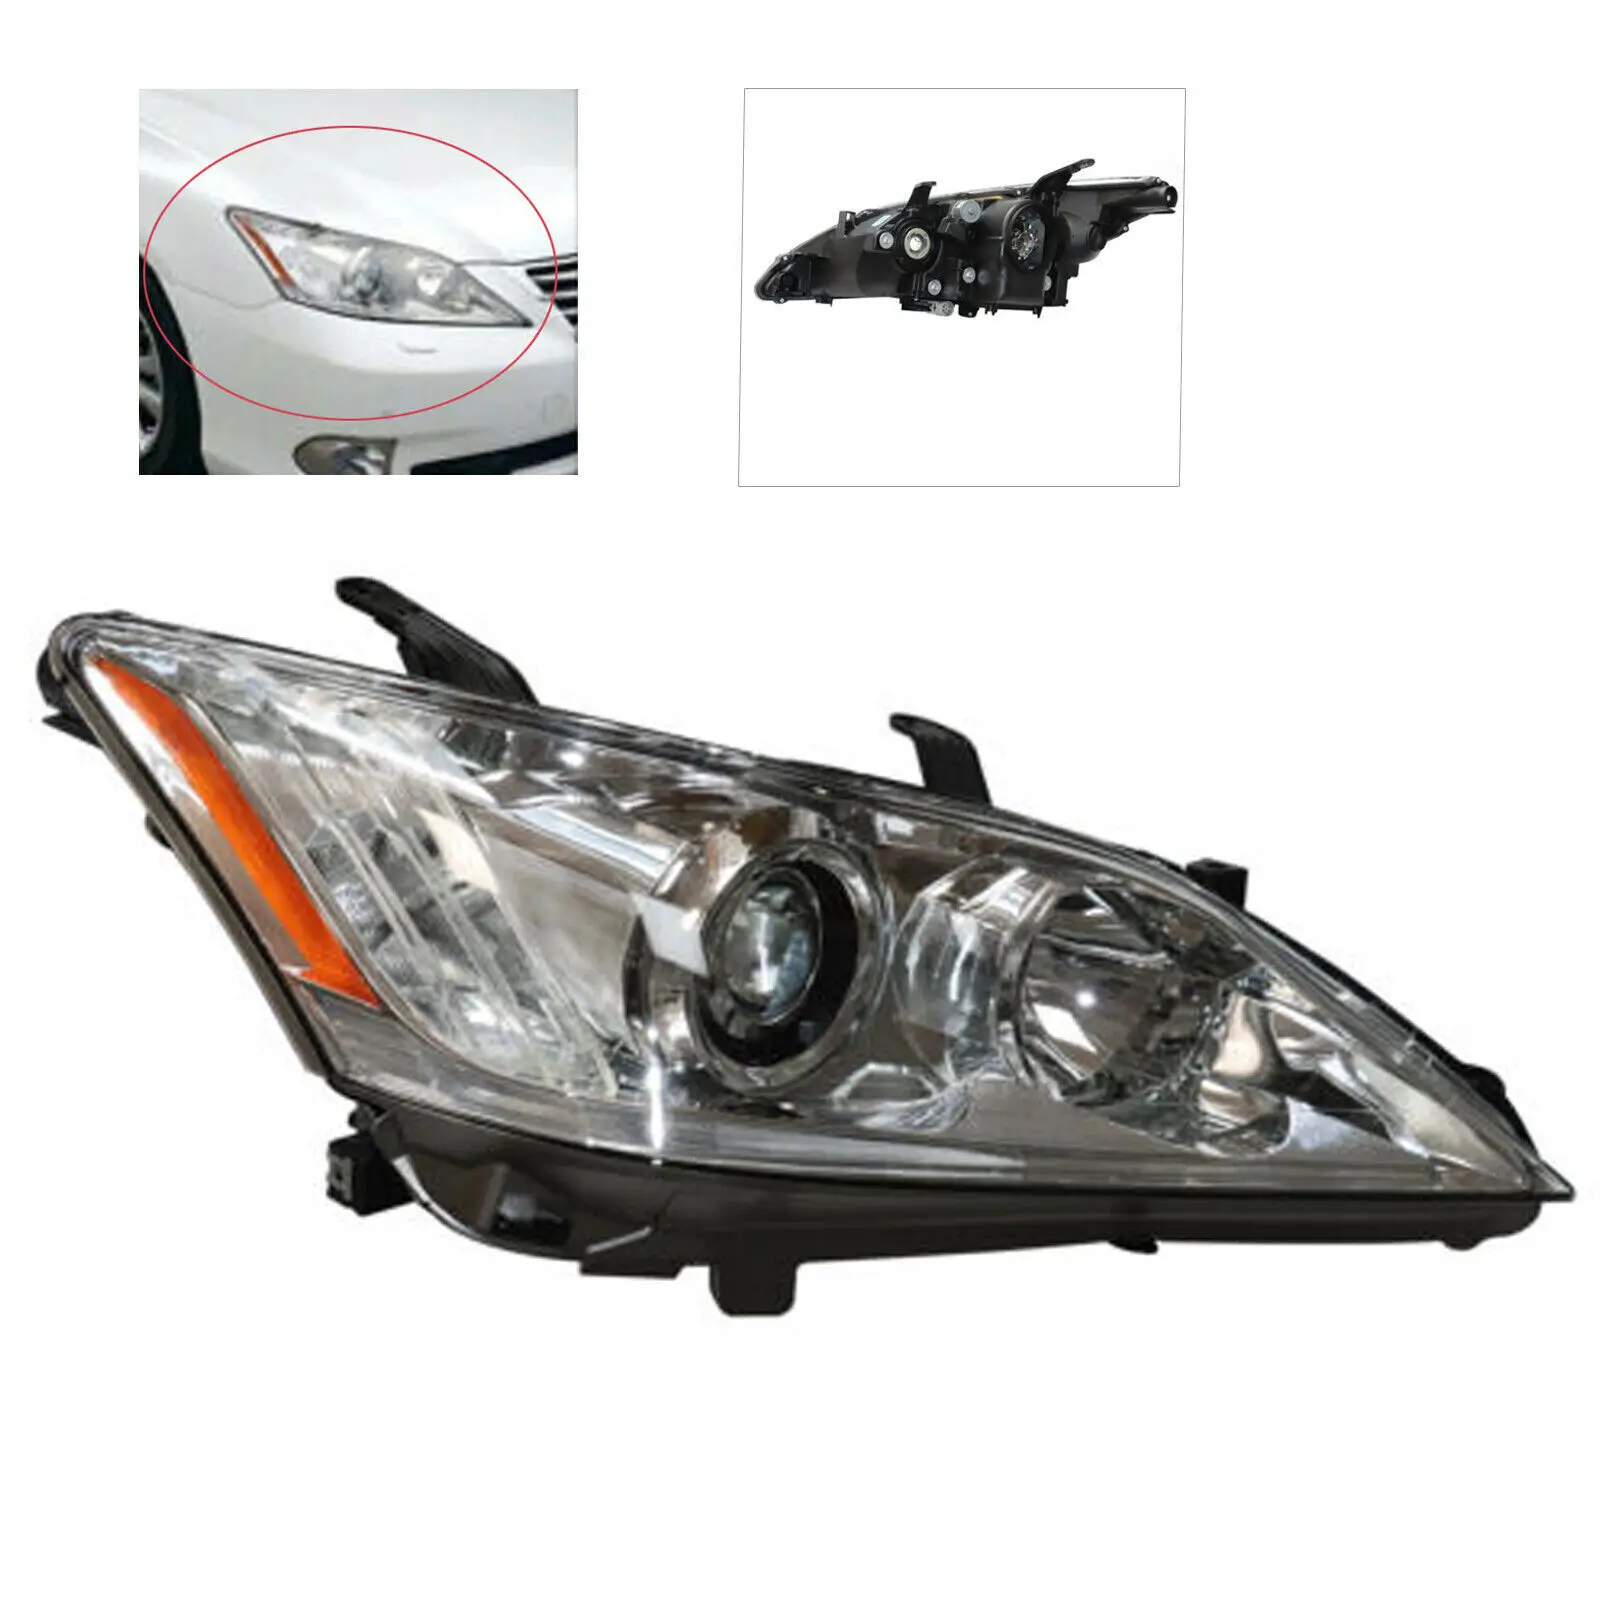 

Right Side HID/Xenon Headlamp Durable Passenger Side Headlight Fits For 2010-2012 Lexus ES350 New Right Headlight